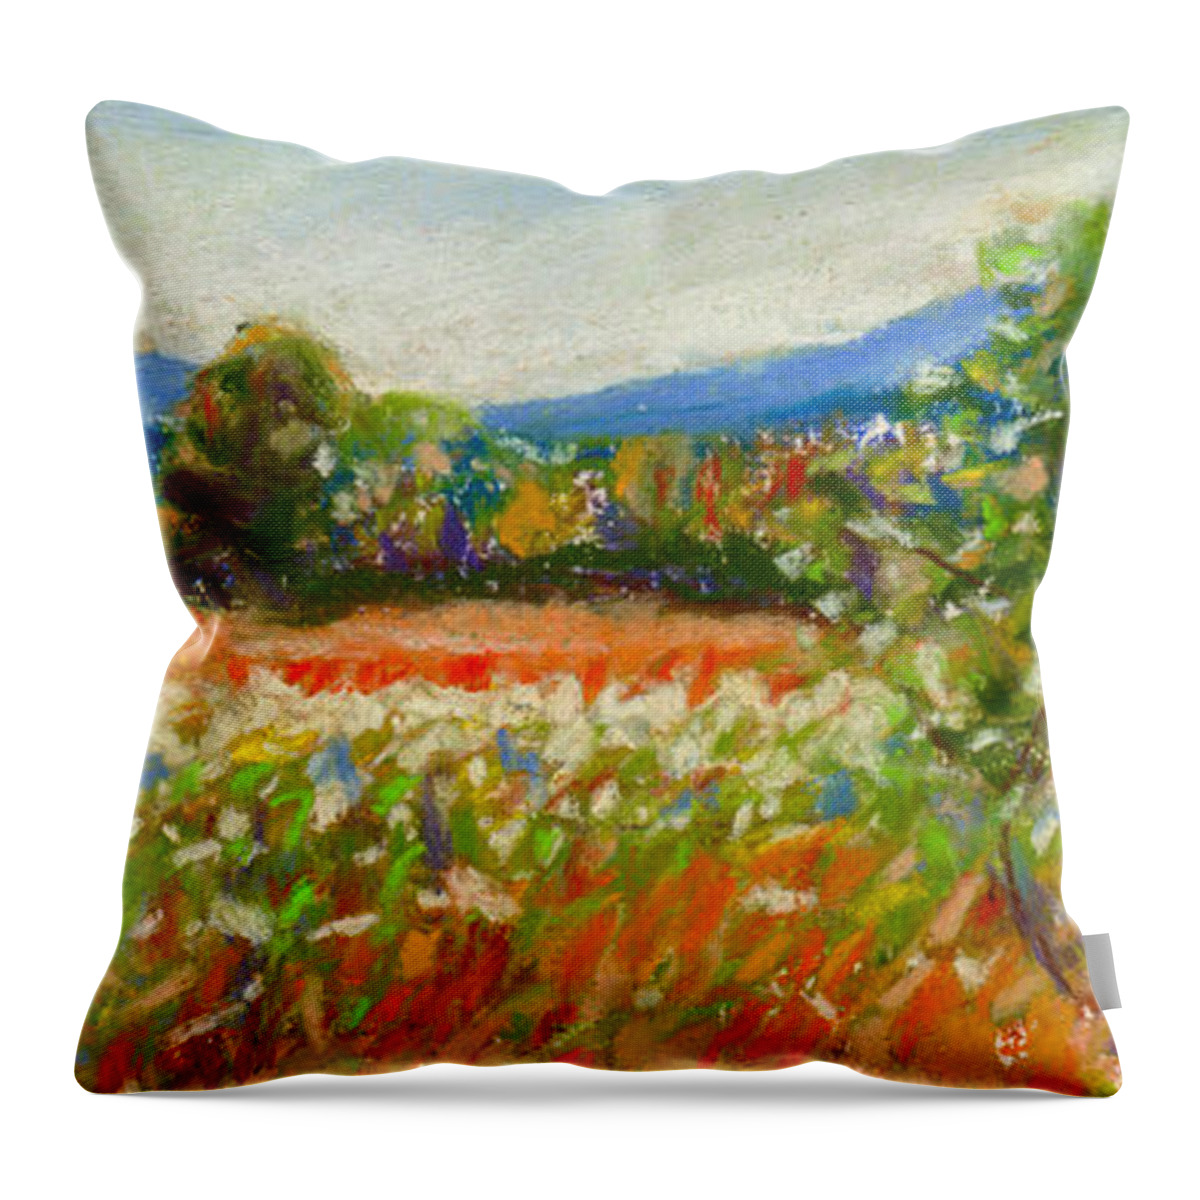 Pastel Painting Throw Pillow featuring the painting Summer by Tanya Filichkin